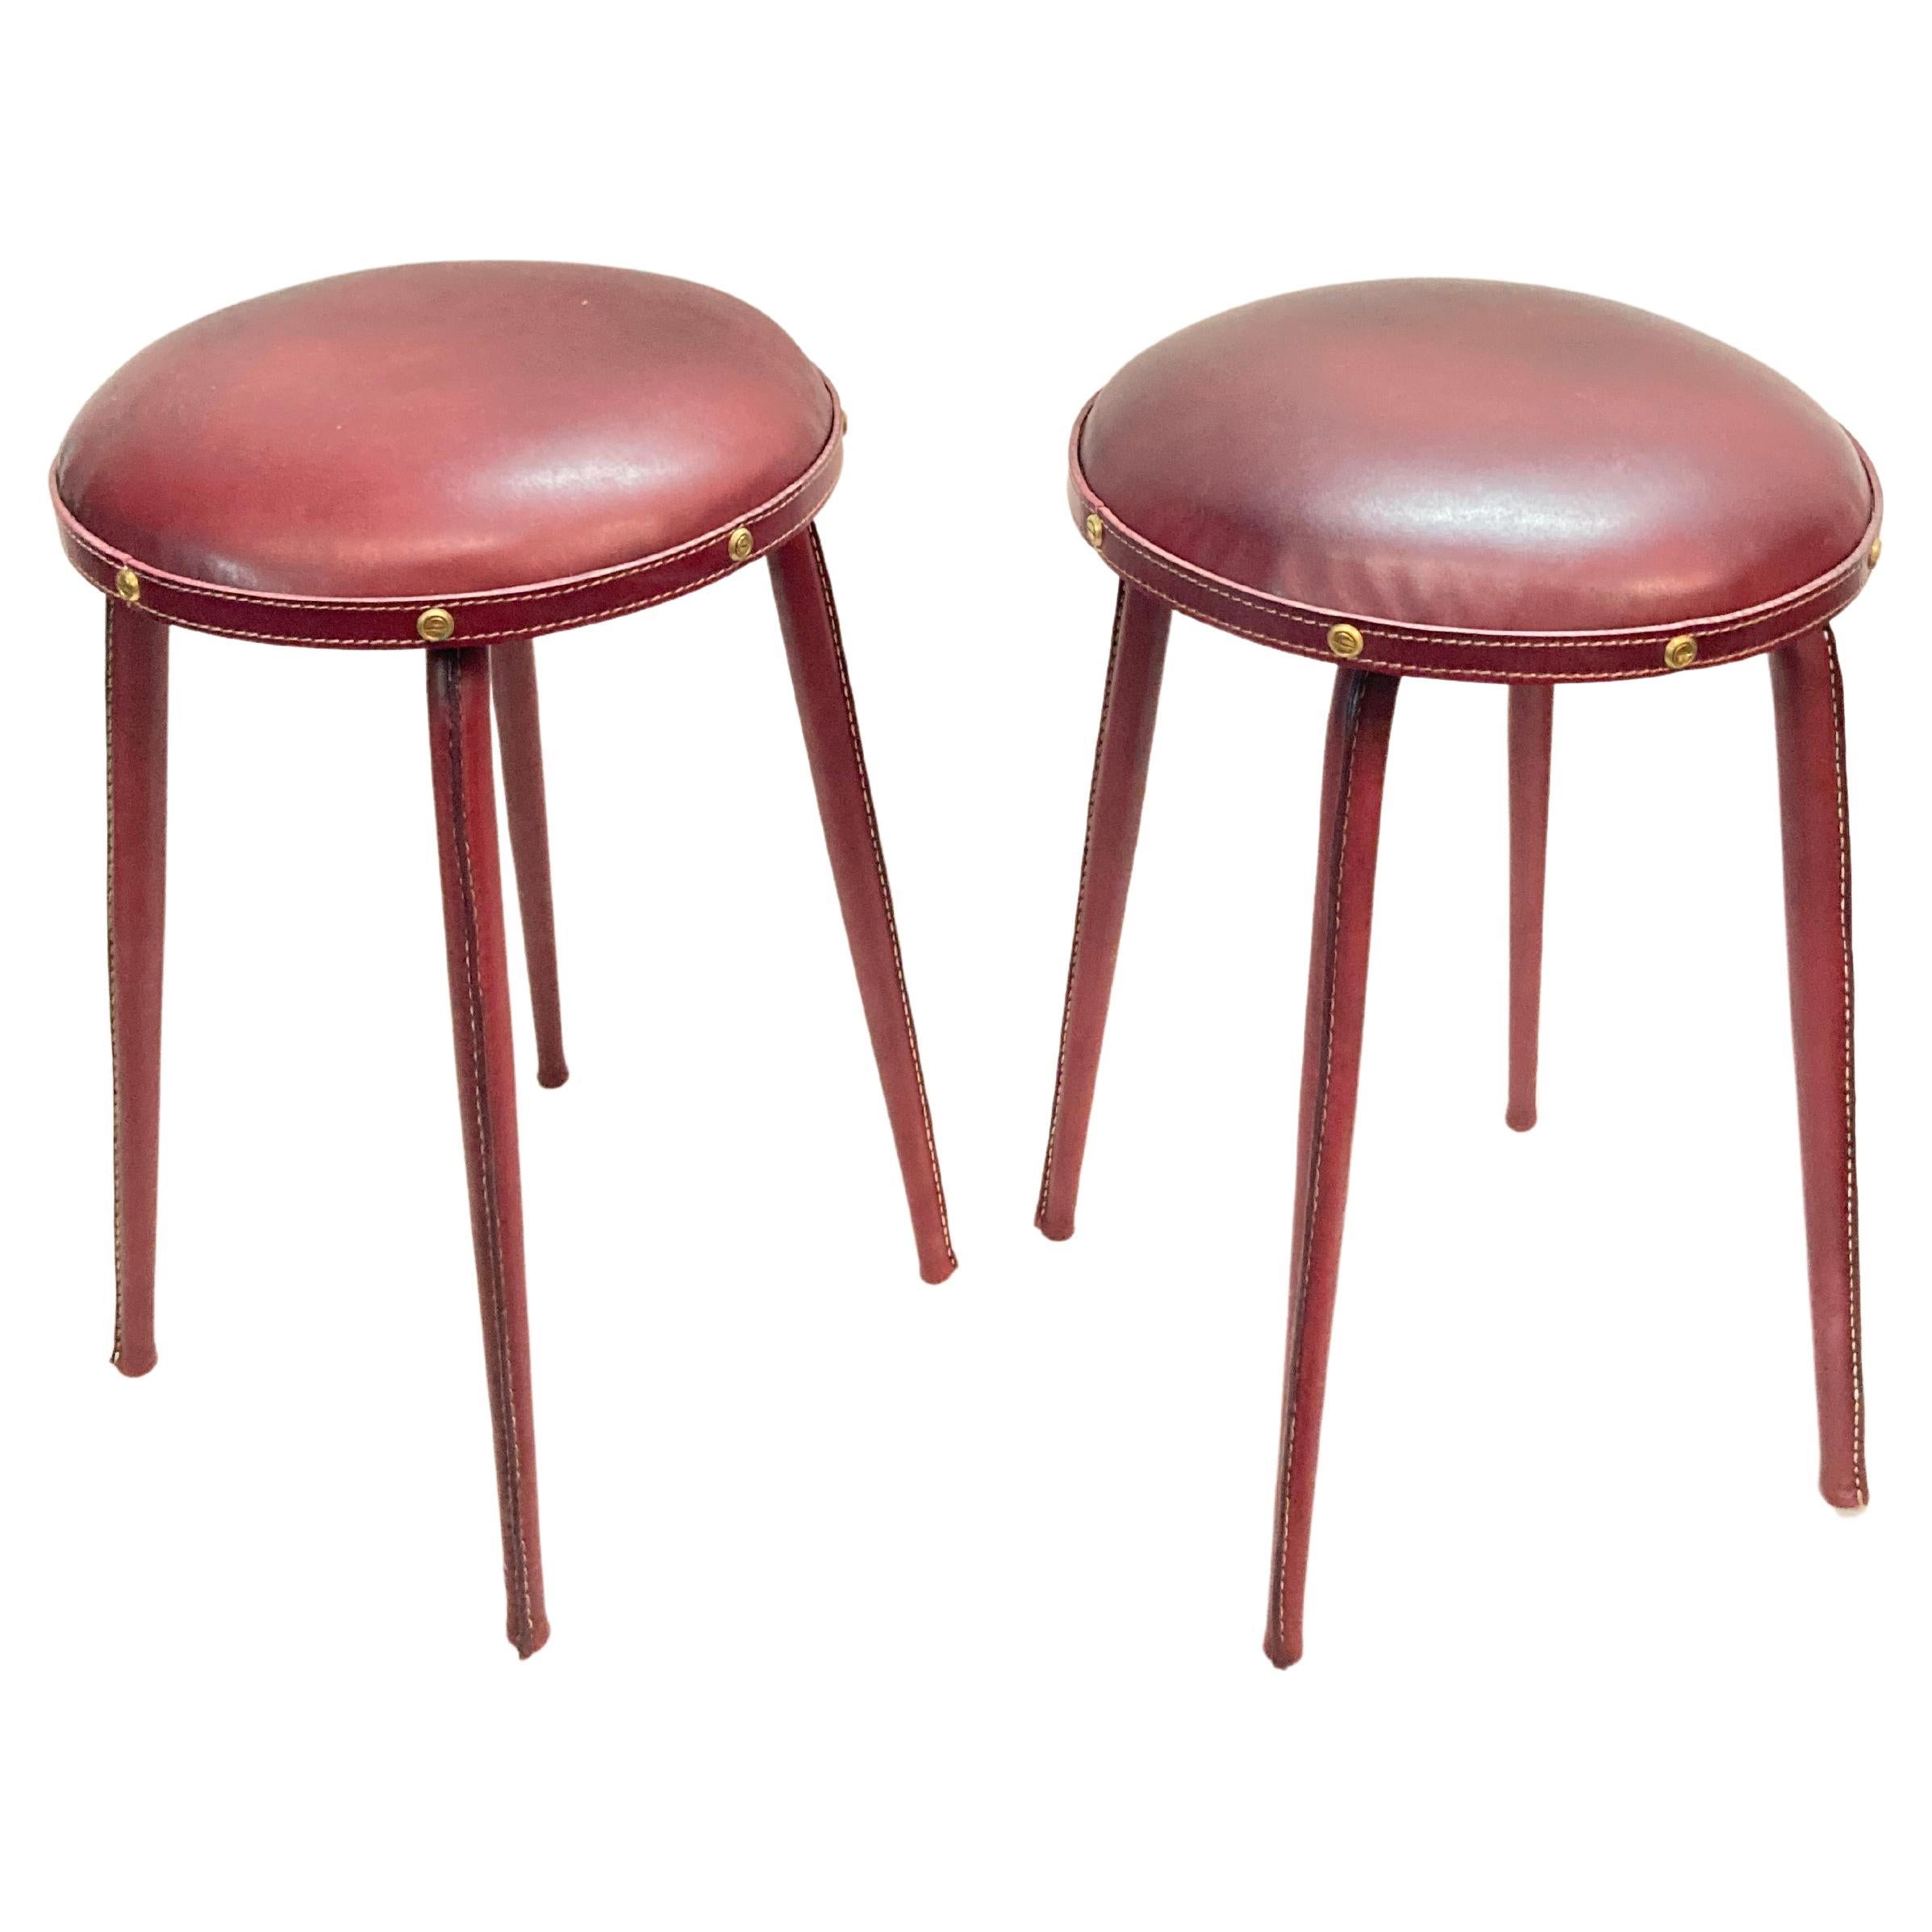 1950's pair of stitched leather stools by Jacques Adnet